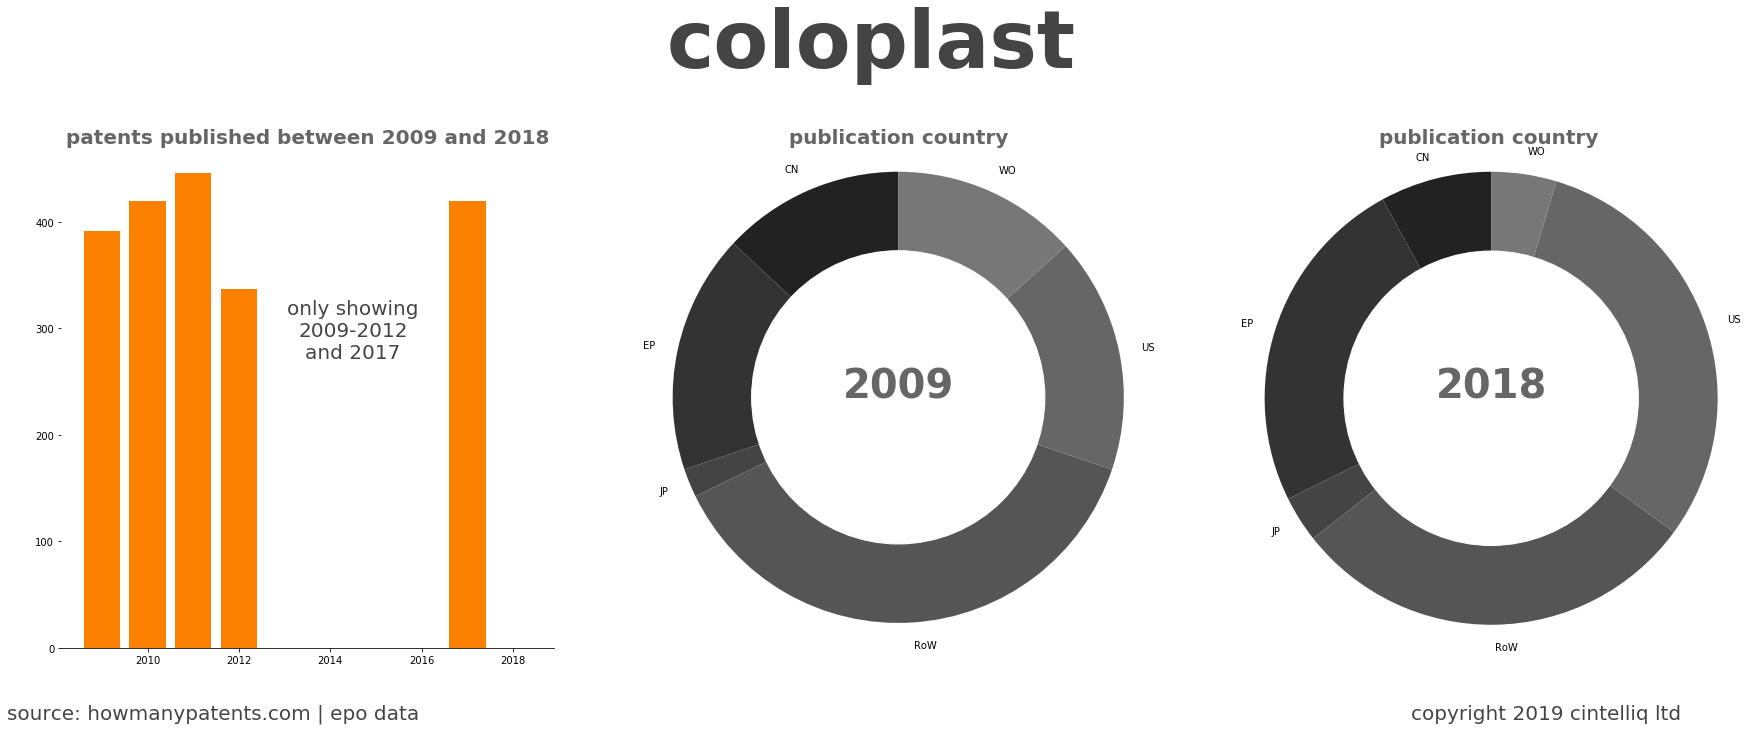 summary of patents for Coloplast